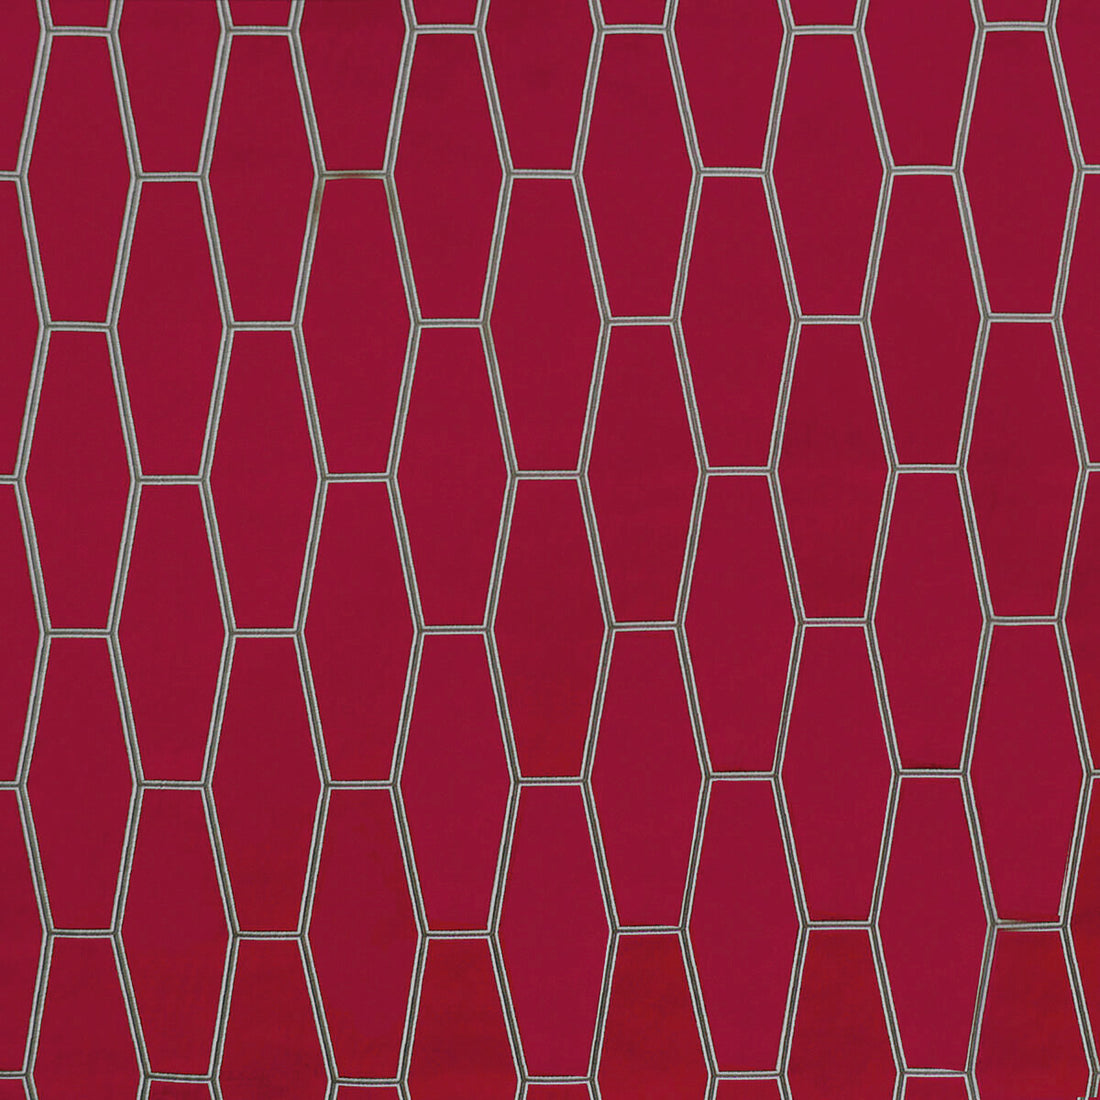 Mai fabric in rojo color - pattern GDT5634.003.0 - by Gaston y Daniela in the Gaston Japon collection